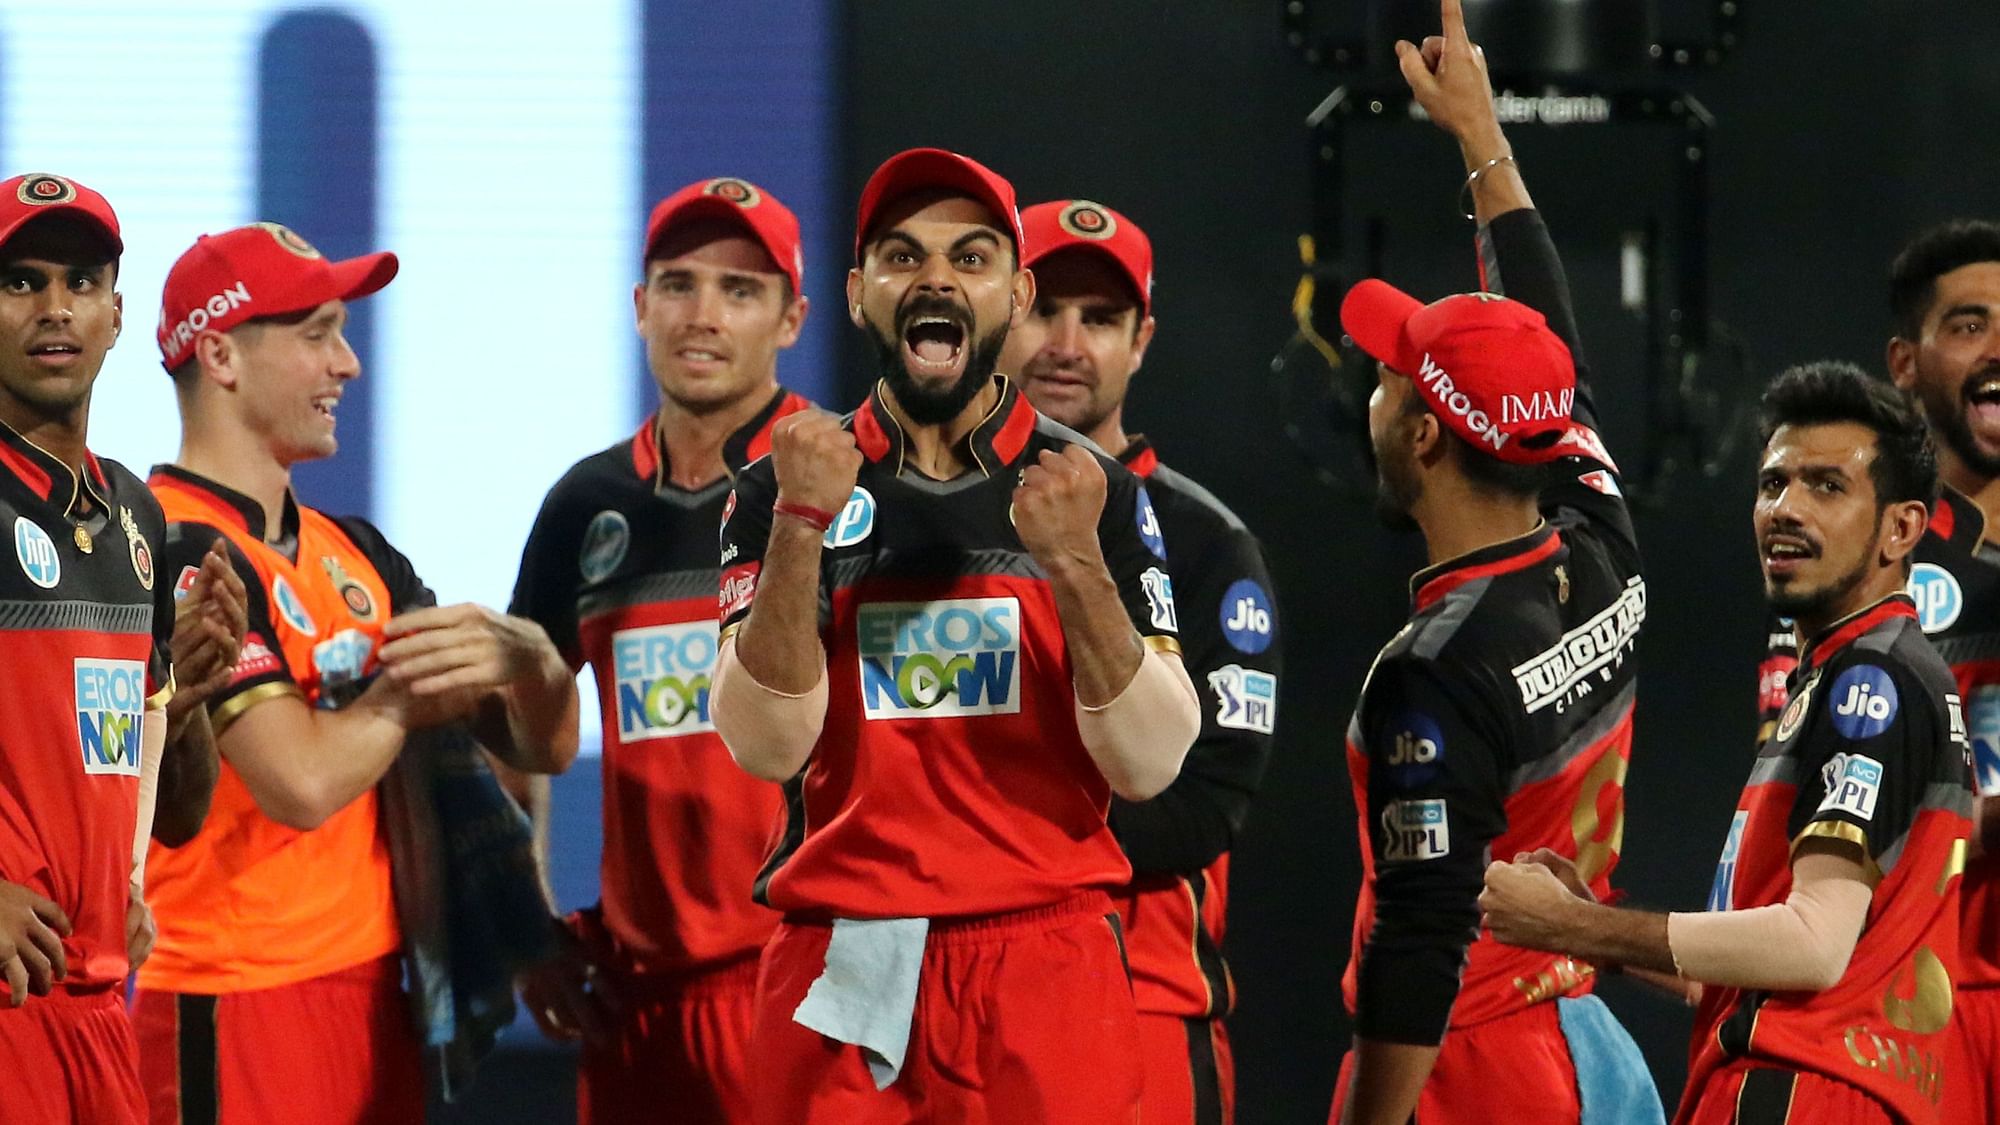 Virat Kohli has said he’s happy with how the RCB team has shaped up in the 2020 IPL auction.